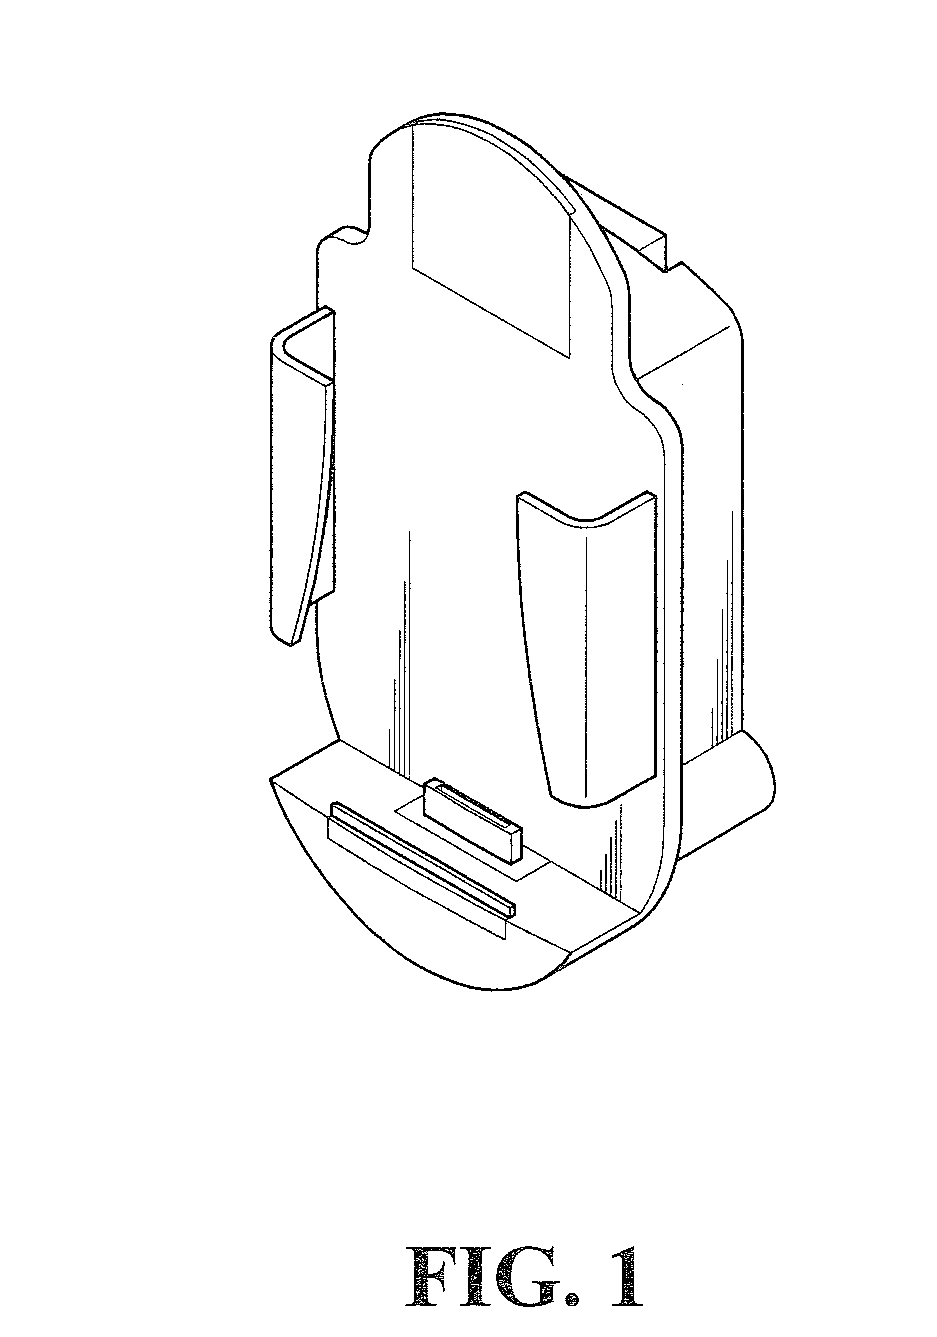 Communication device holder for vehicles